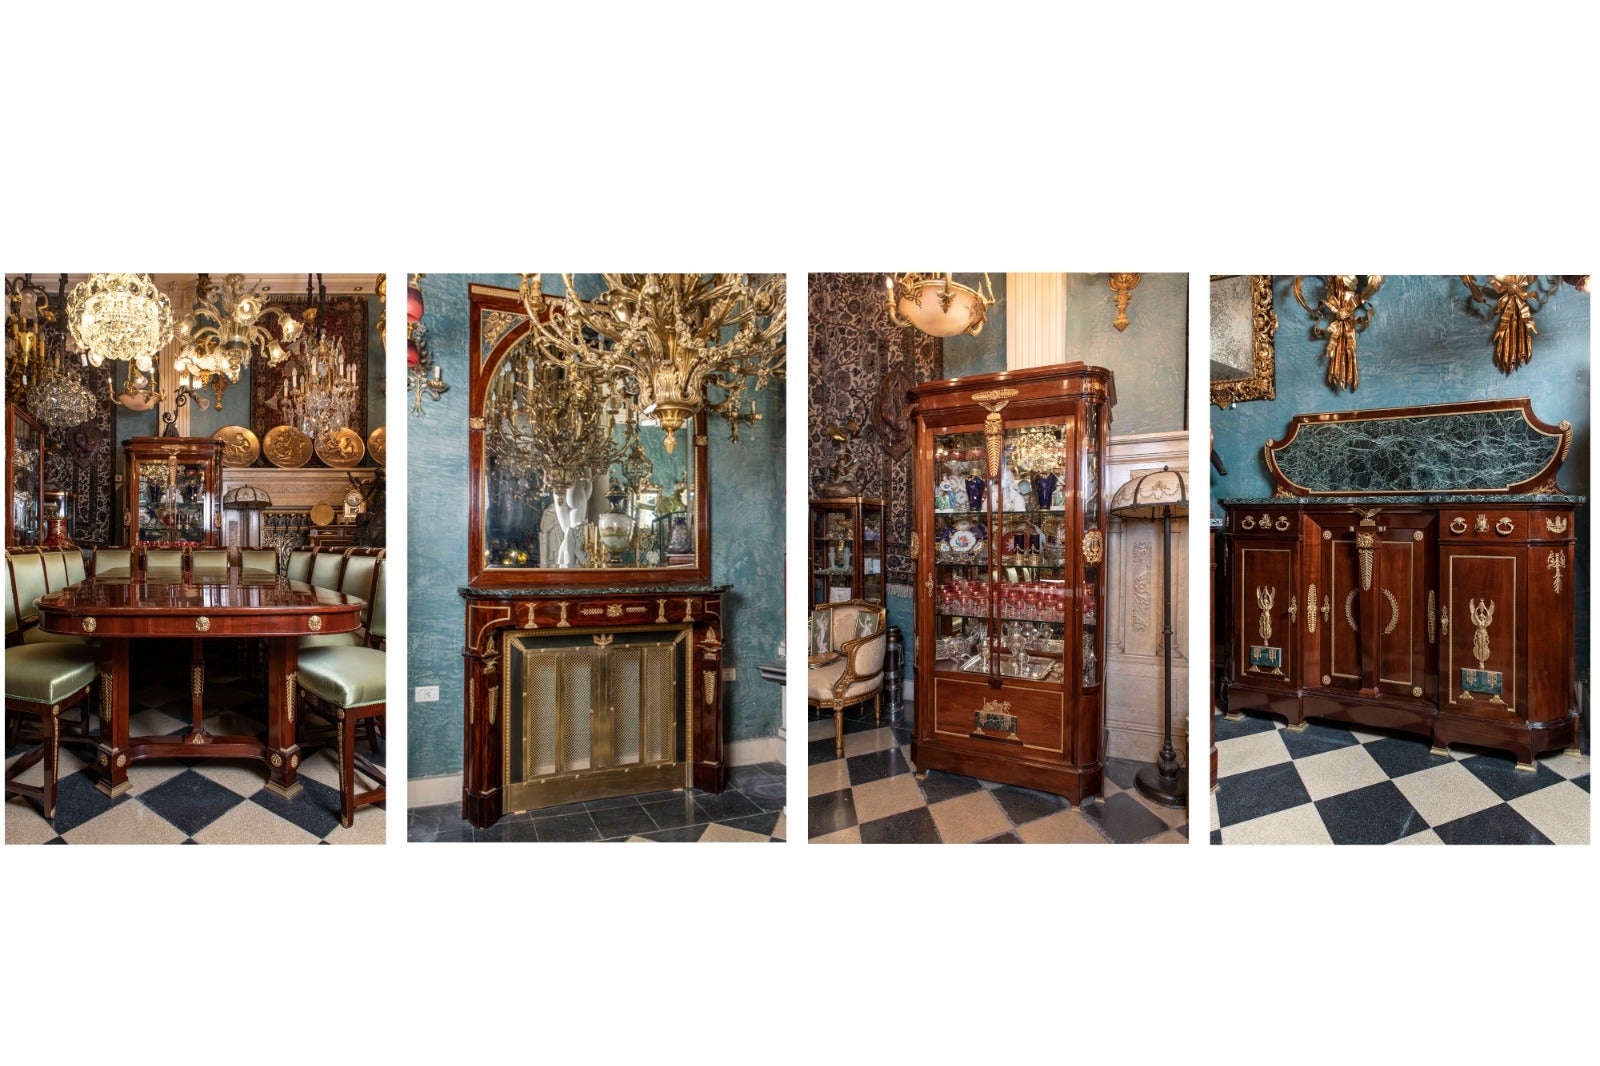 Complete Dining Room Set with Vitrine, Clock, Buffets, Mirror and Fireplace For Sale